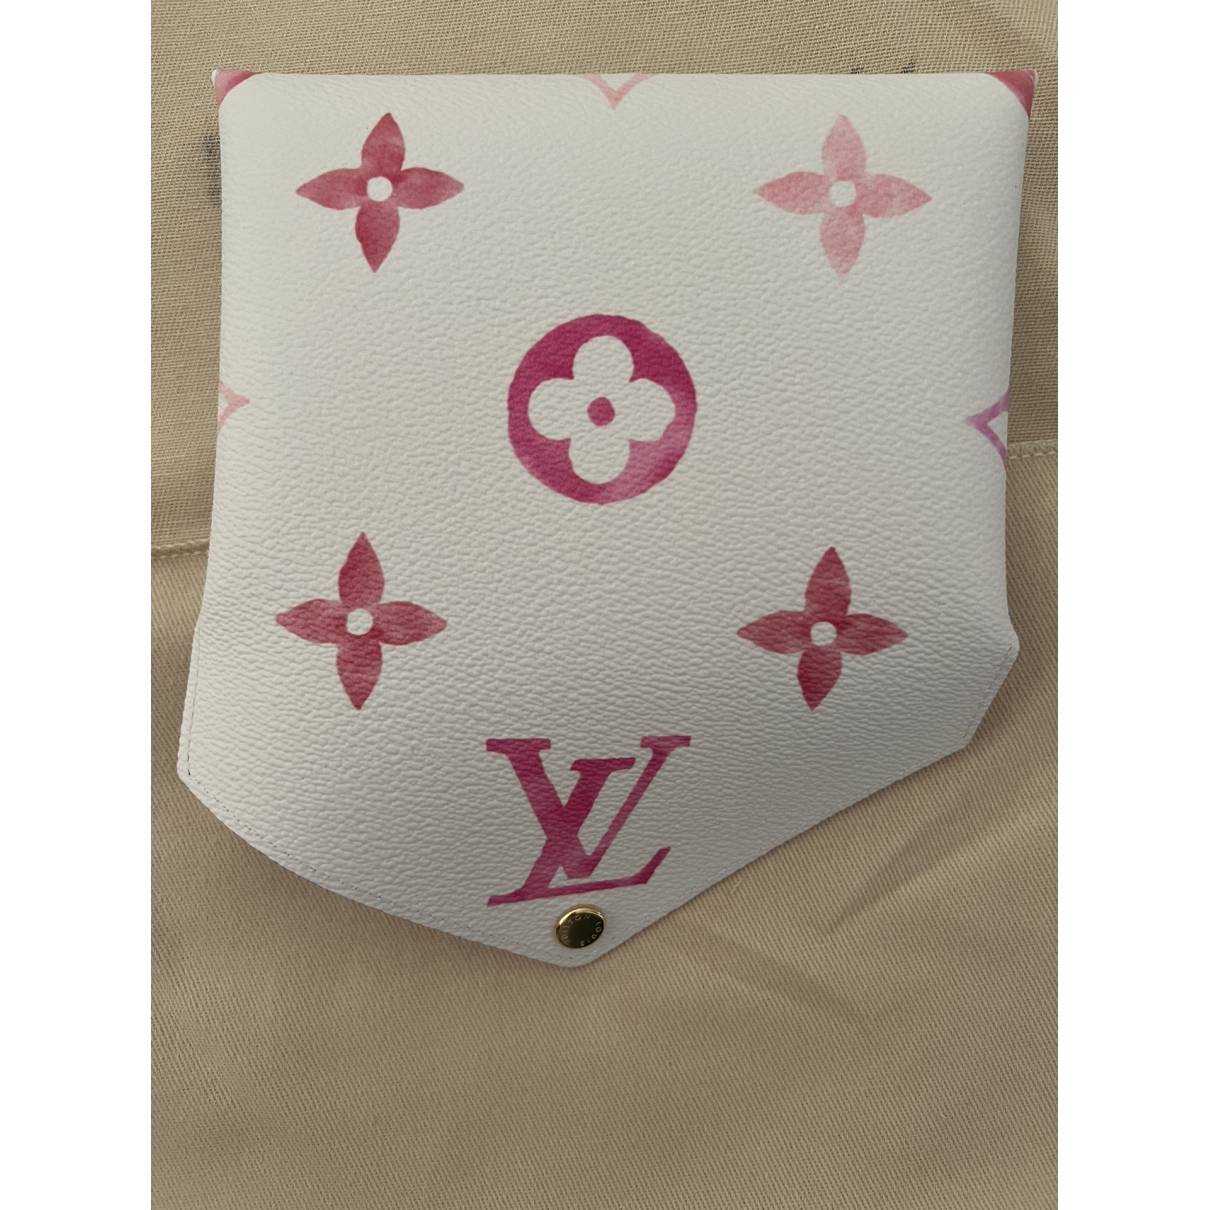 Louis Vuitton - Authenticated Kirigami Clutch Bag - Cloth Pink for Women, Never Worn